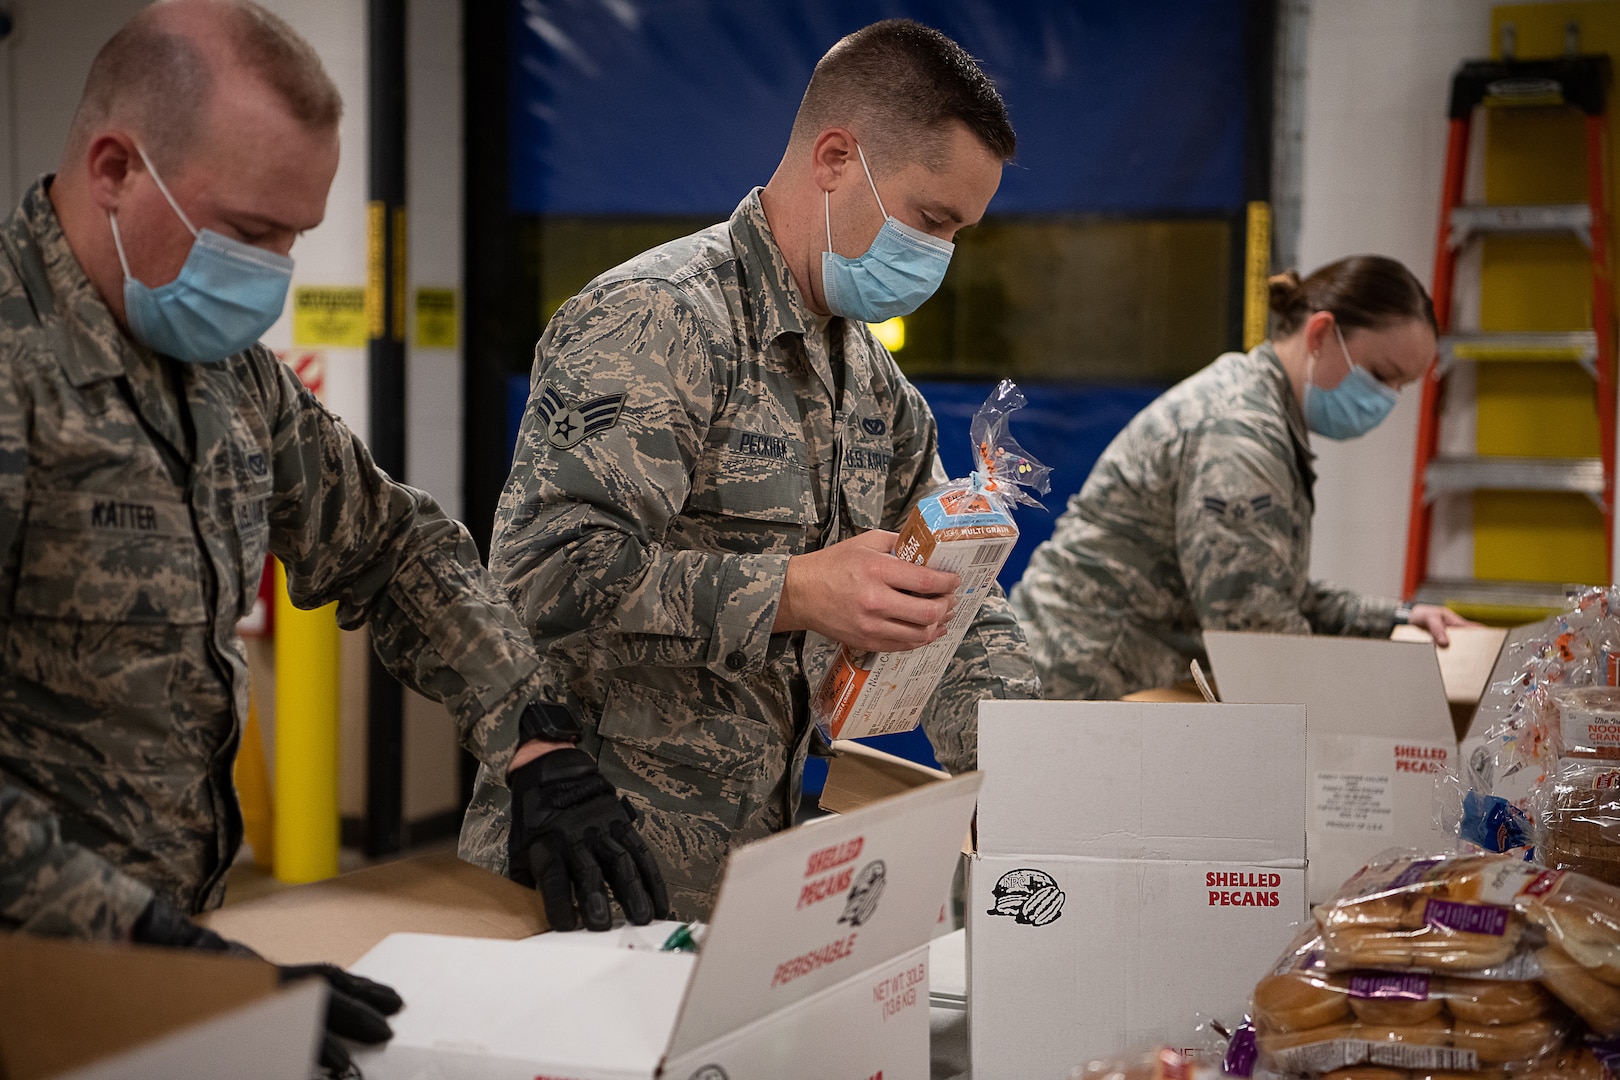 Members of the Oklahoma Air National Guard with the 137th Special Operations Wing pack and sort boxes of food for transport in support of the Regional Food Bank of Oklahoma in Oklahoma City, April 24, 2020. Gov. Kevin Stitt activated 25 additional Guardsmen in Oklahoma City and another 25 in Tulsa to assist the regional food banks.